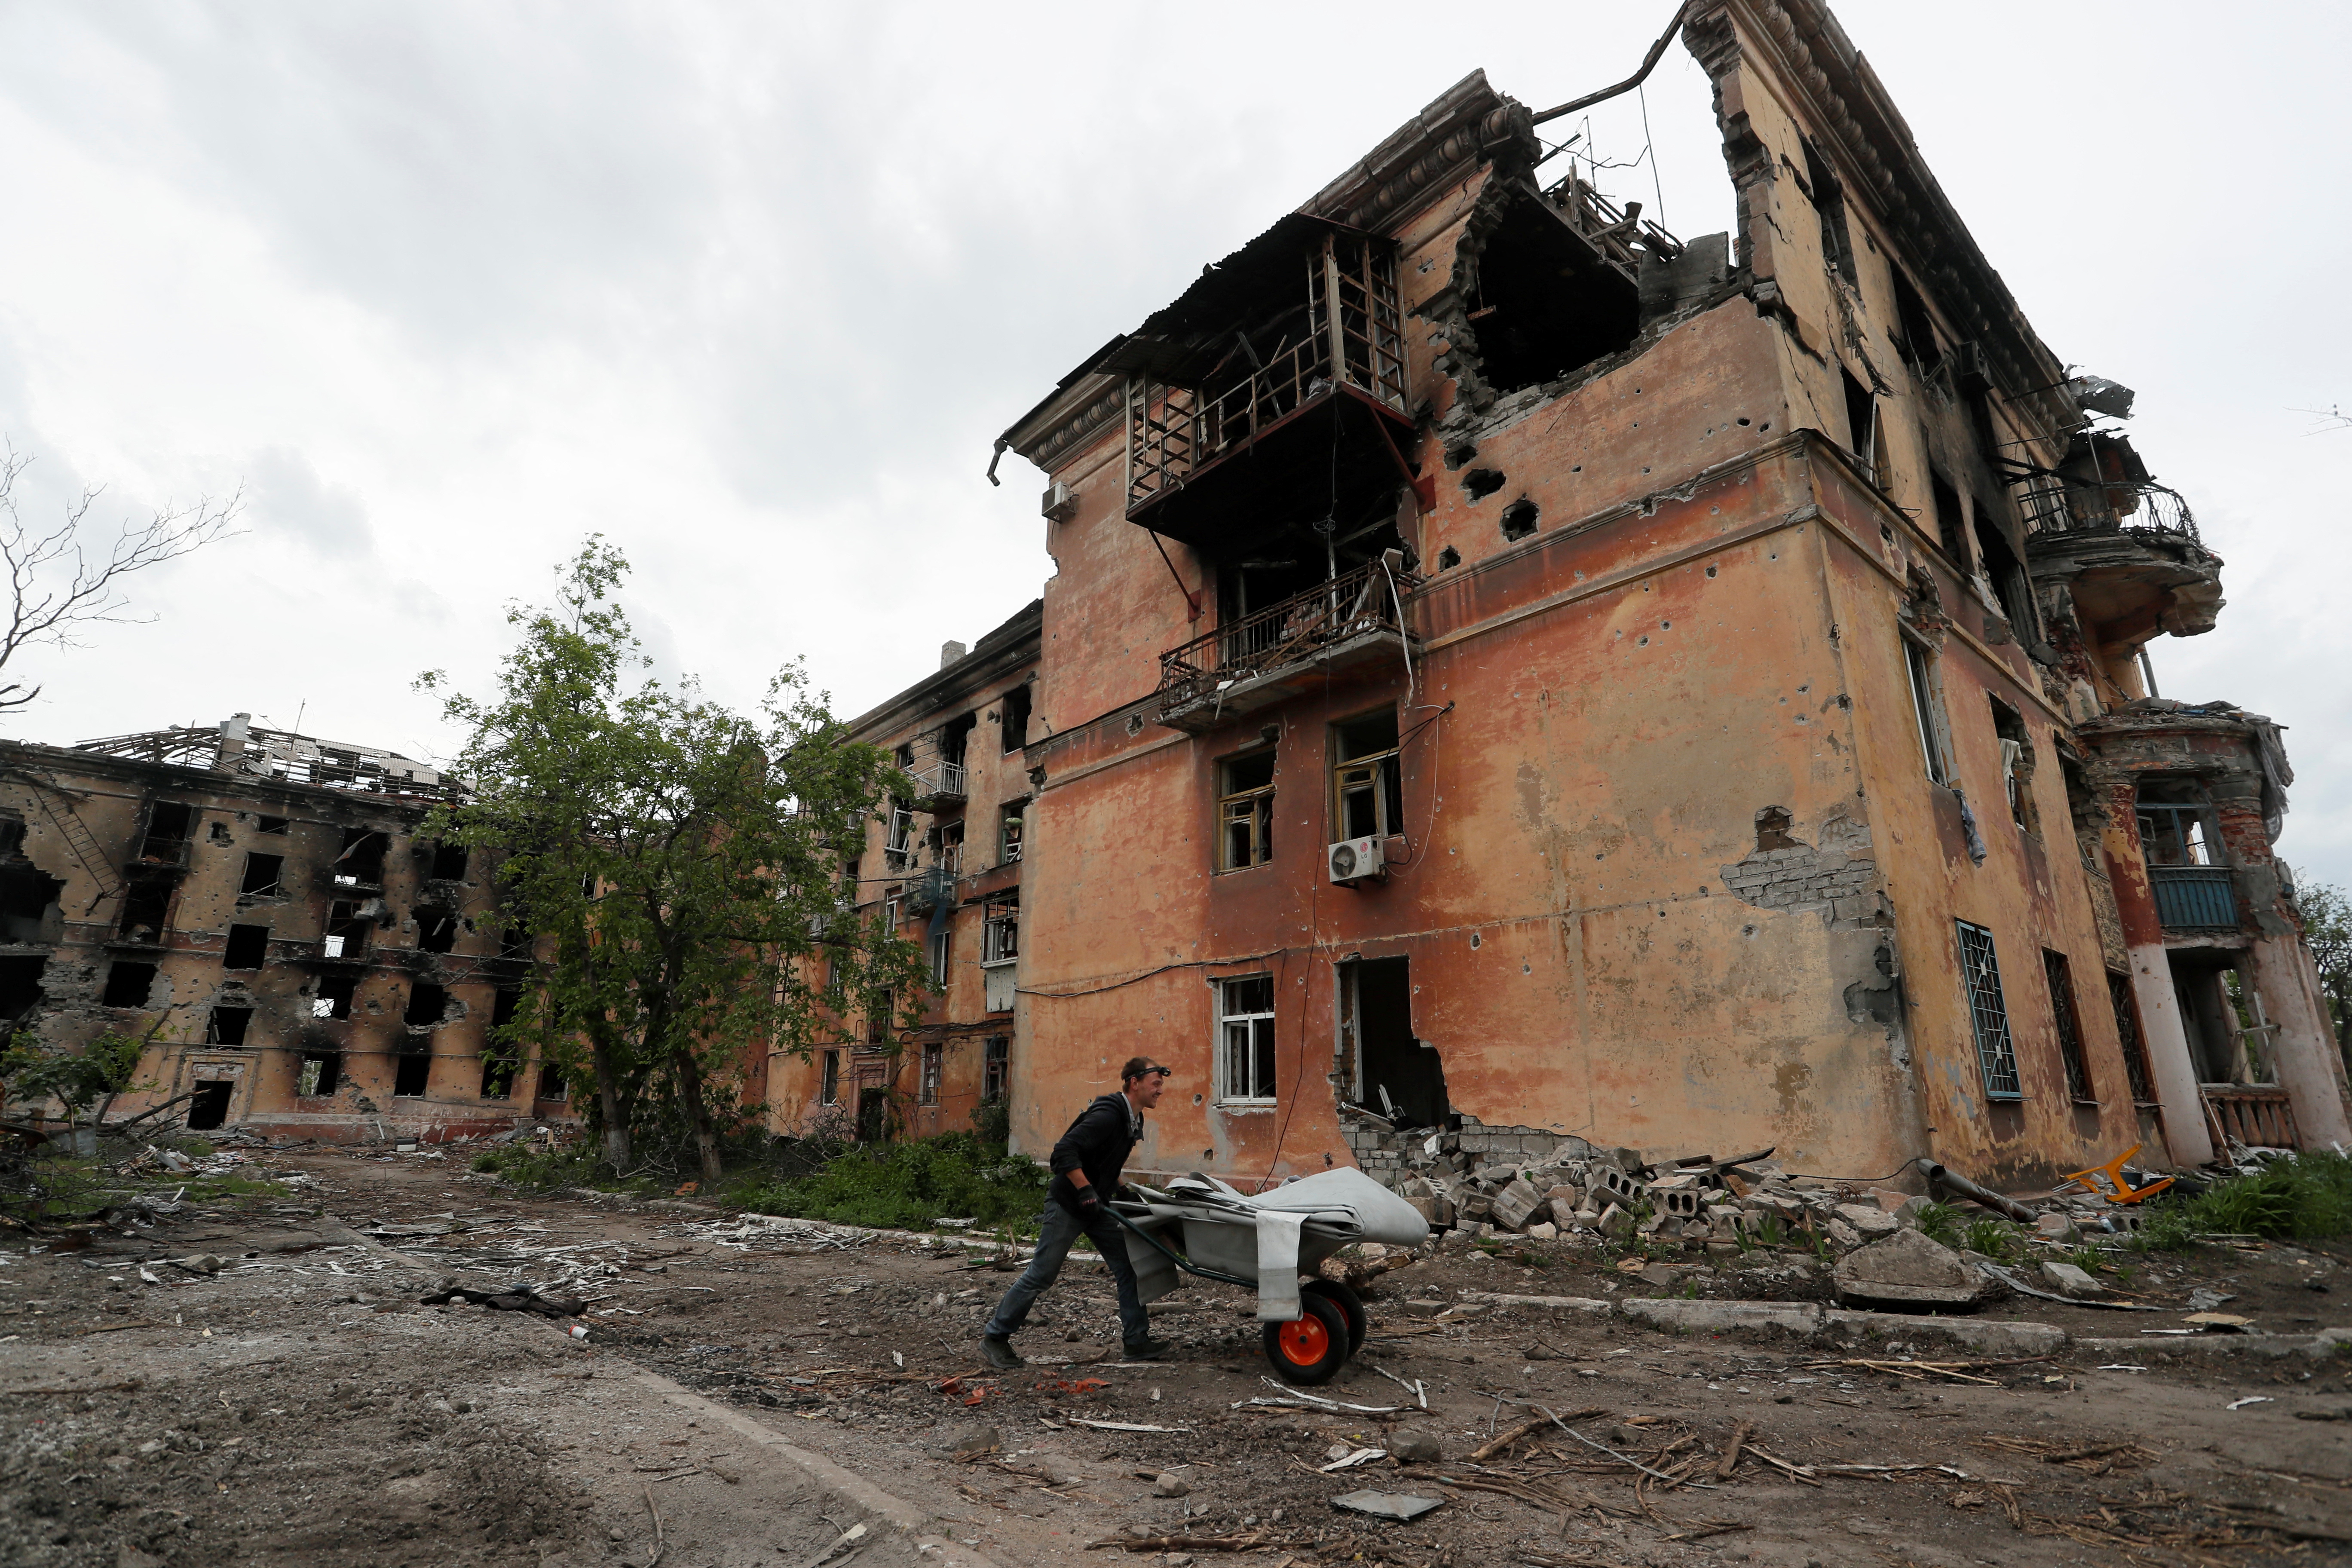 A local resident pushes a wheelbarrow past a heavily damaged apartment building in Mariupol